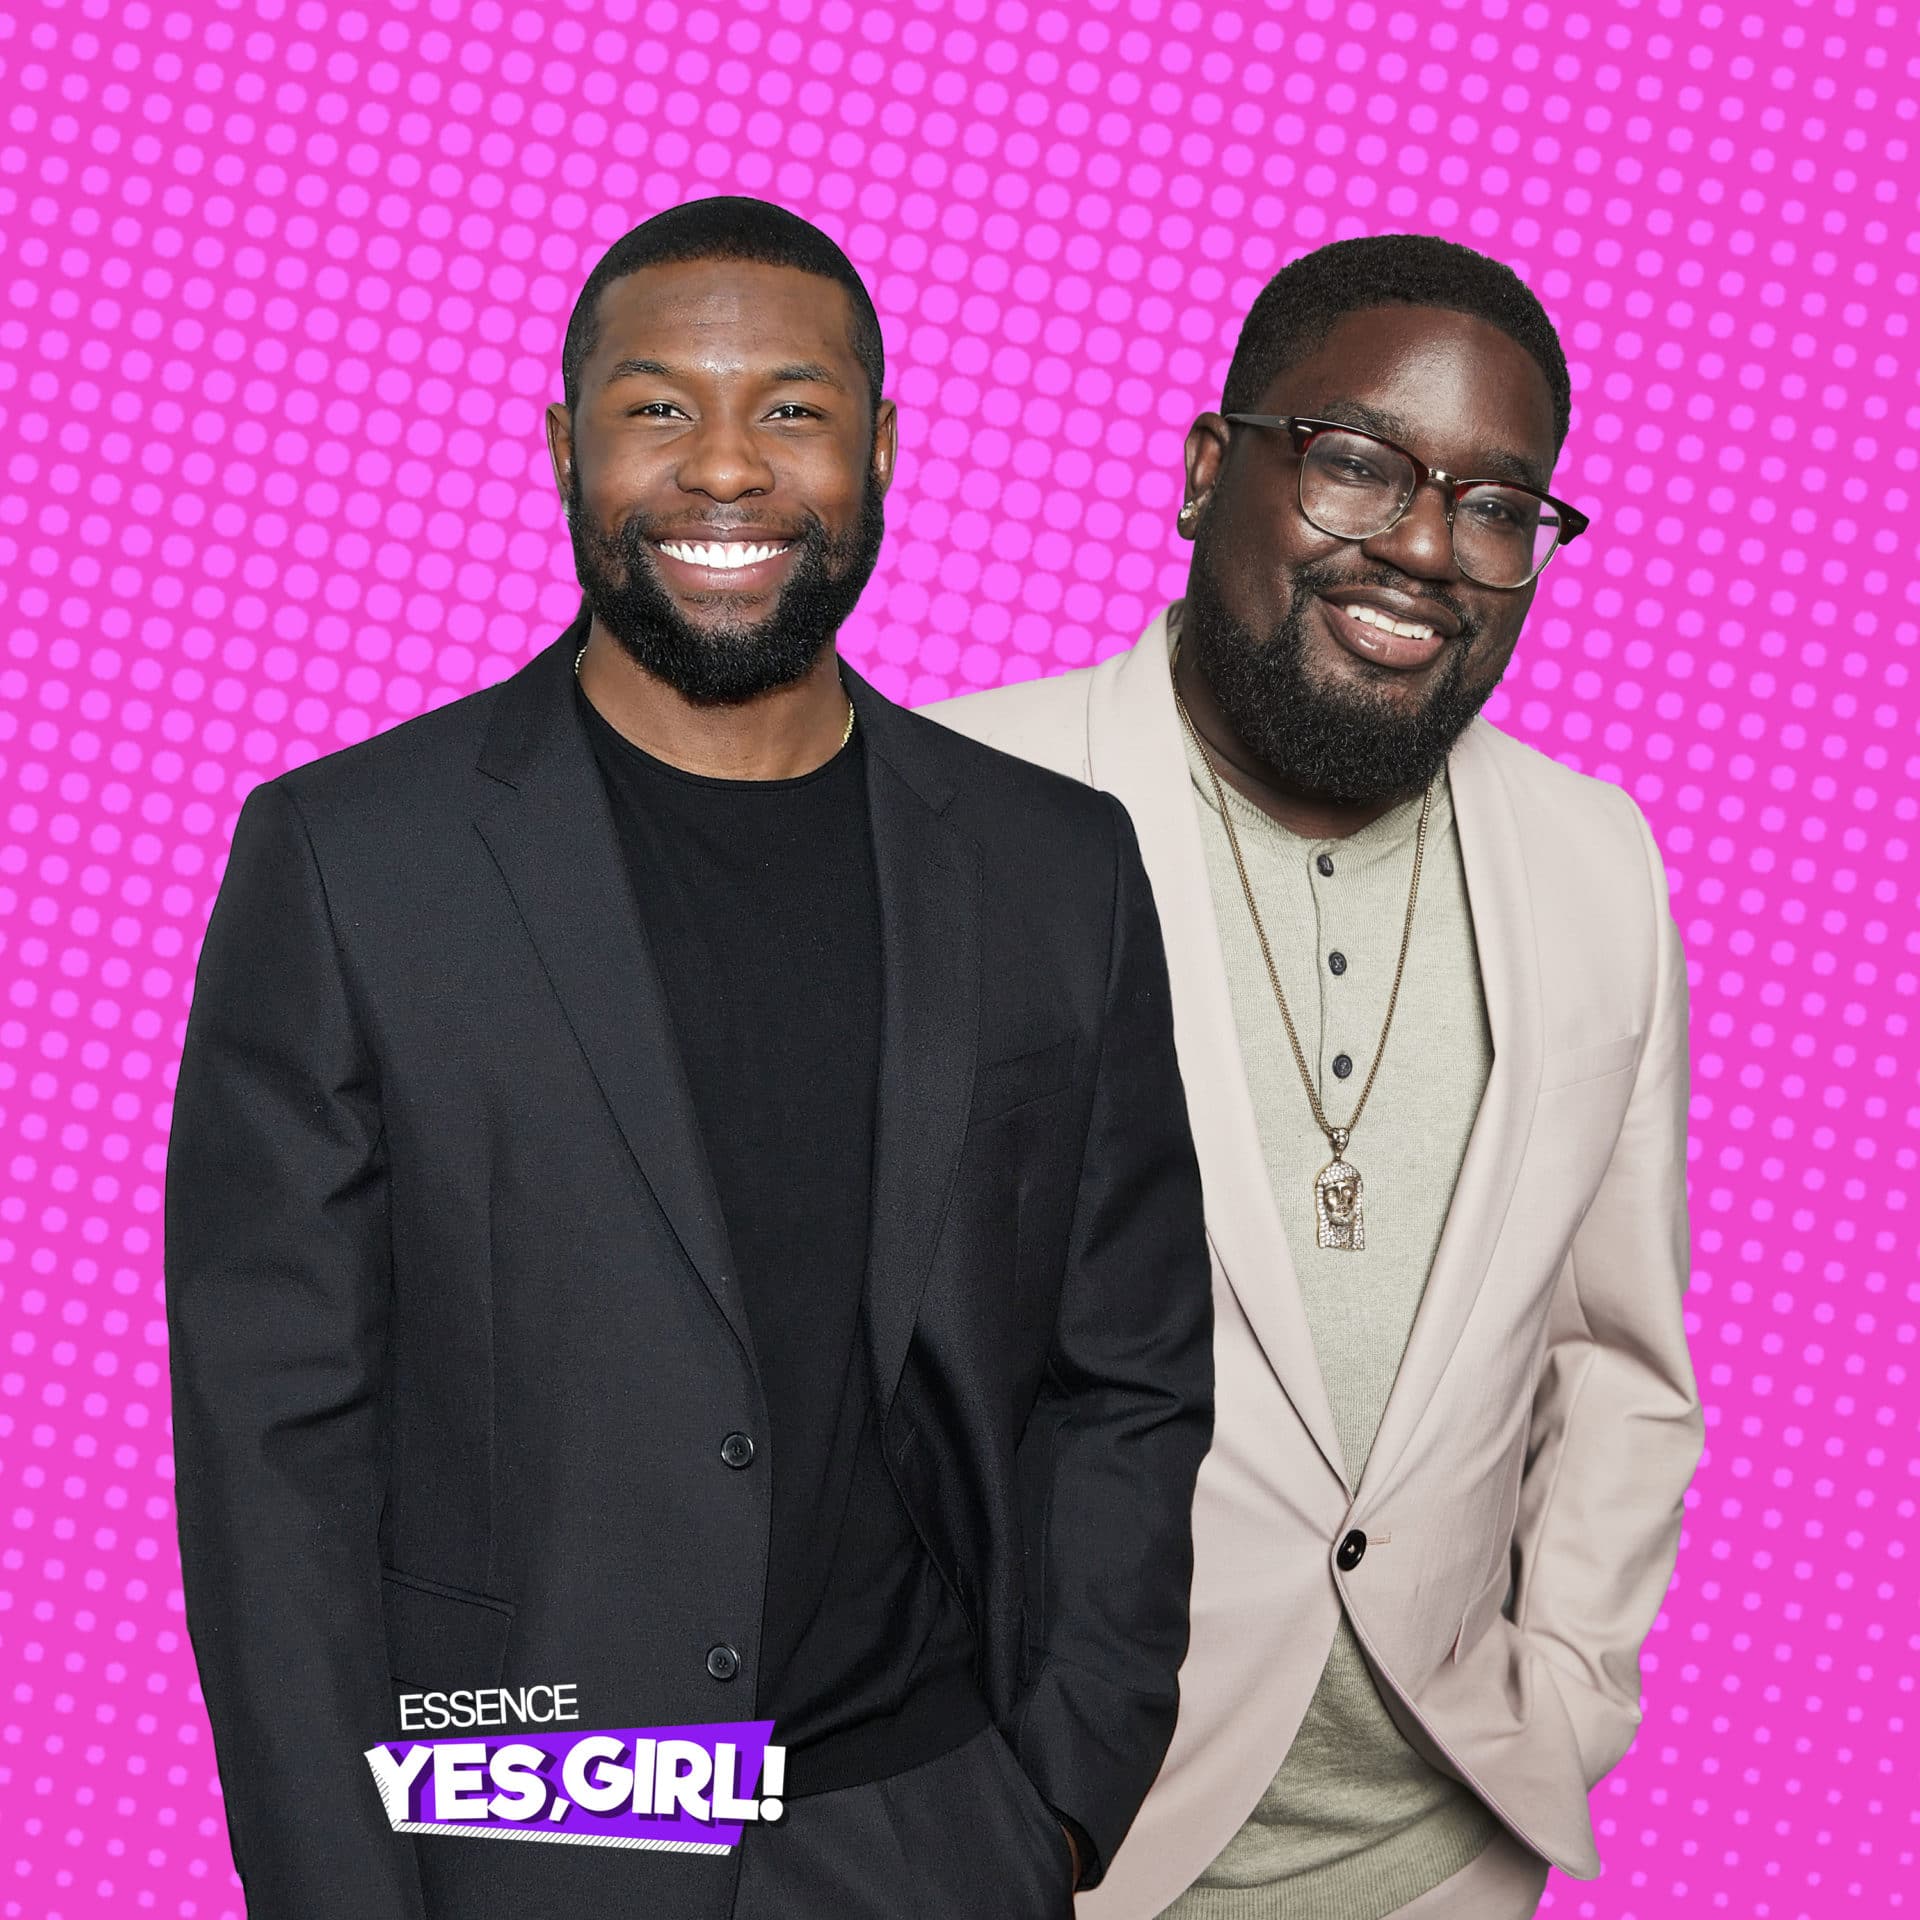 'Bird Box' Star Trevante Rhodes Talks About His 'New' Bae Status: 'It's Cool, But...'